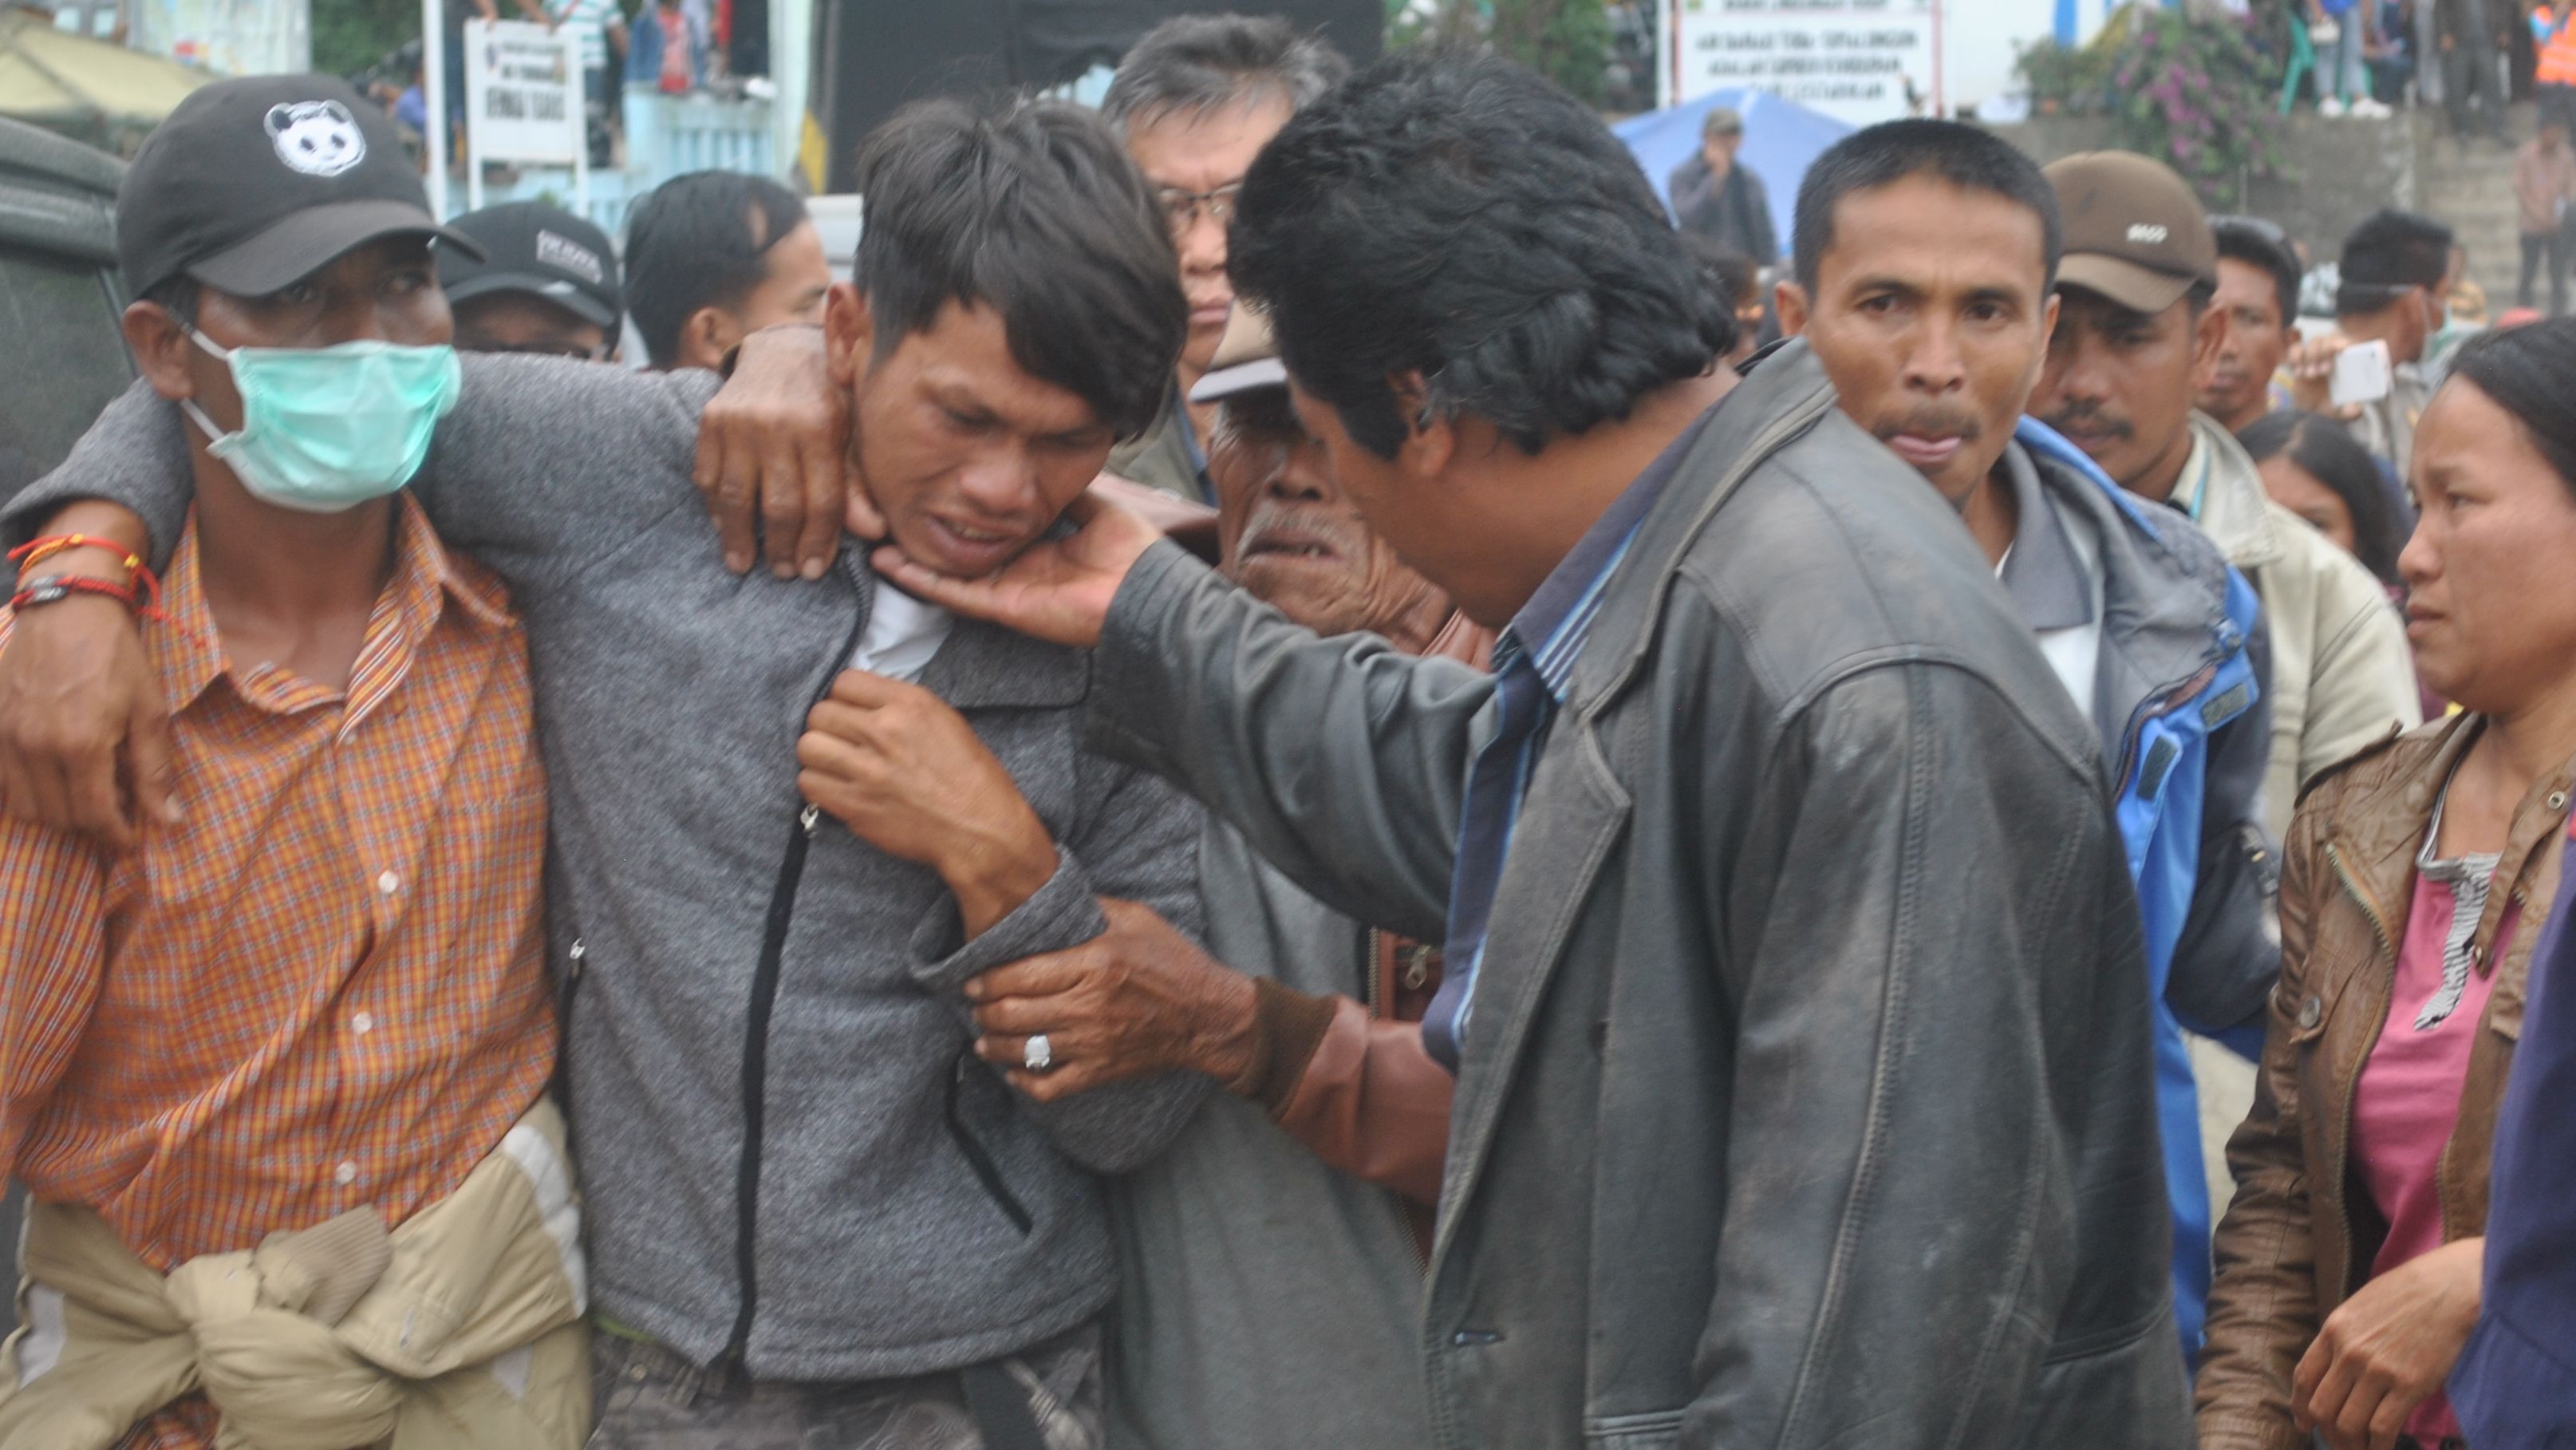 18 Survivors were pulled from the water shortly after the ferry sank on 18 June